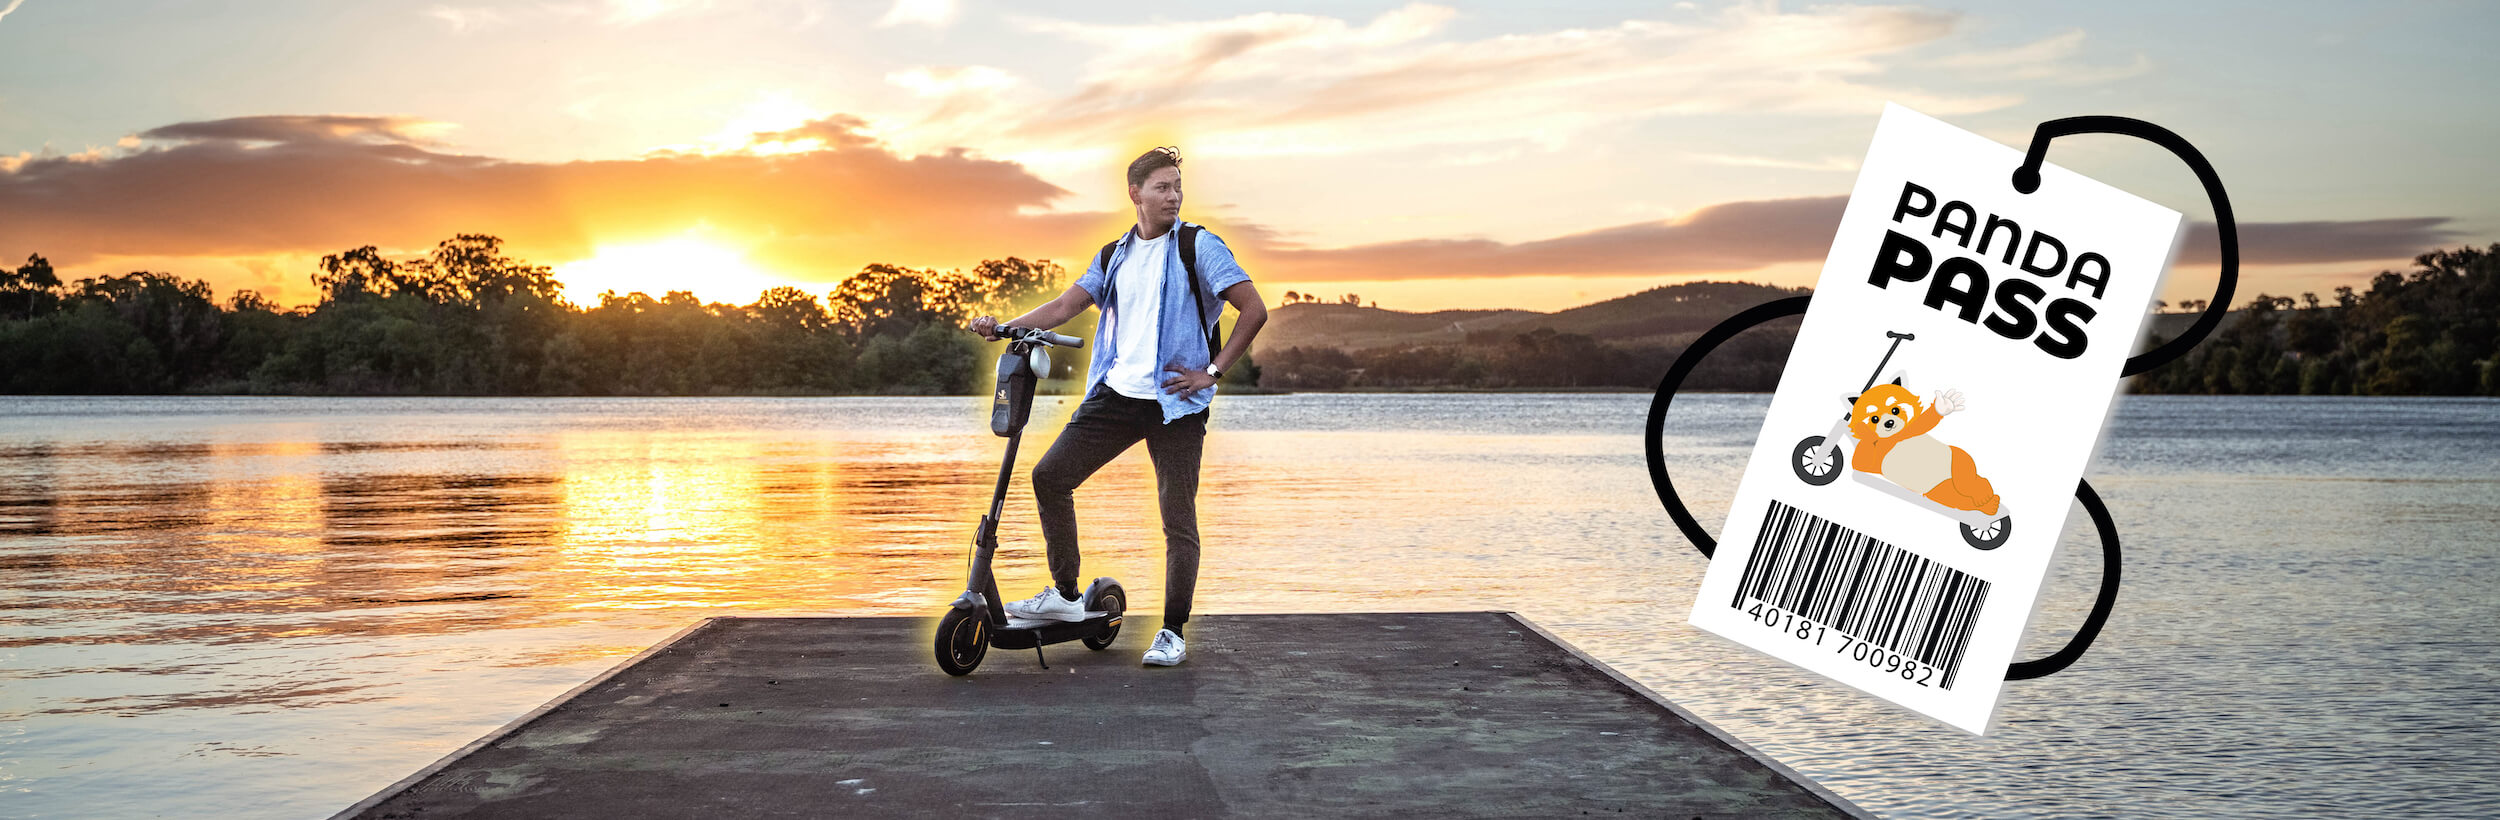 Electric Scooters Sydney